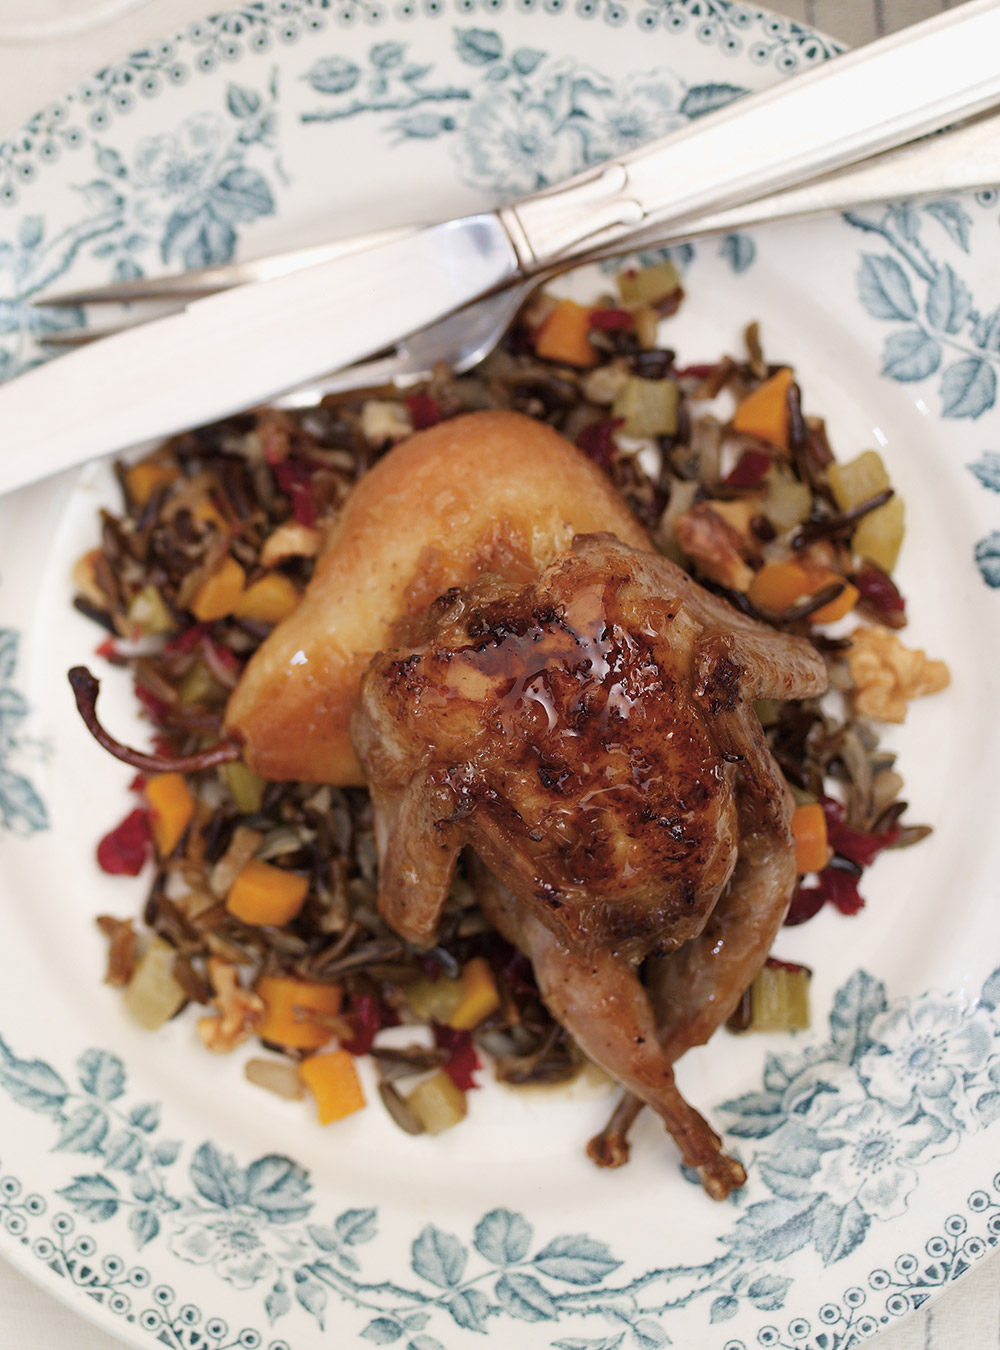 Quail and Pear with a Spiced Wine Sauce